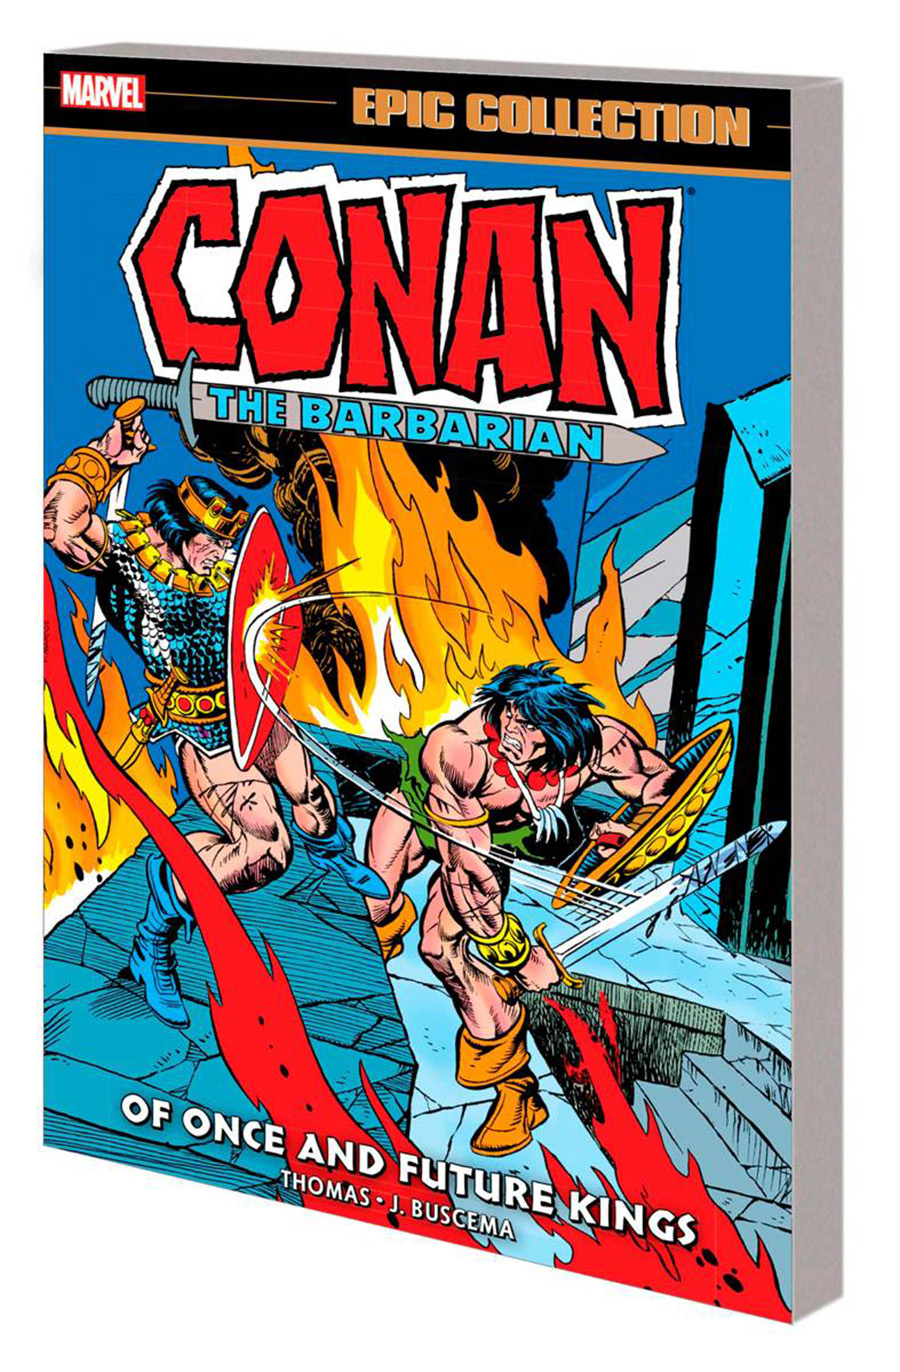 Conan The Barbarian Original Marvel Years Epic Collection Vol 5 Of Once And Future Kings TP